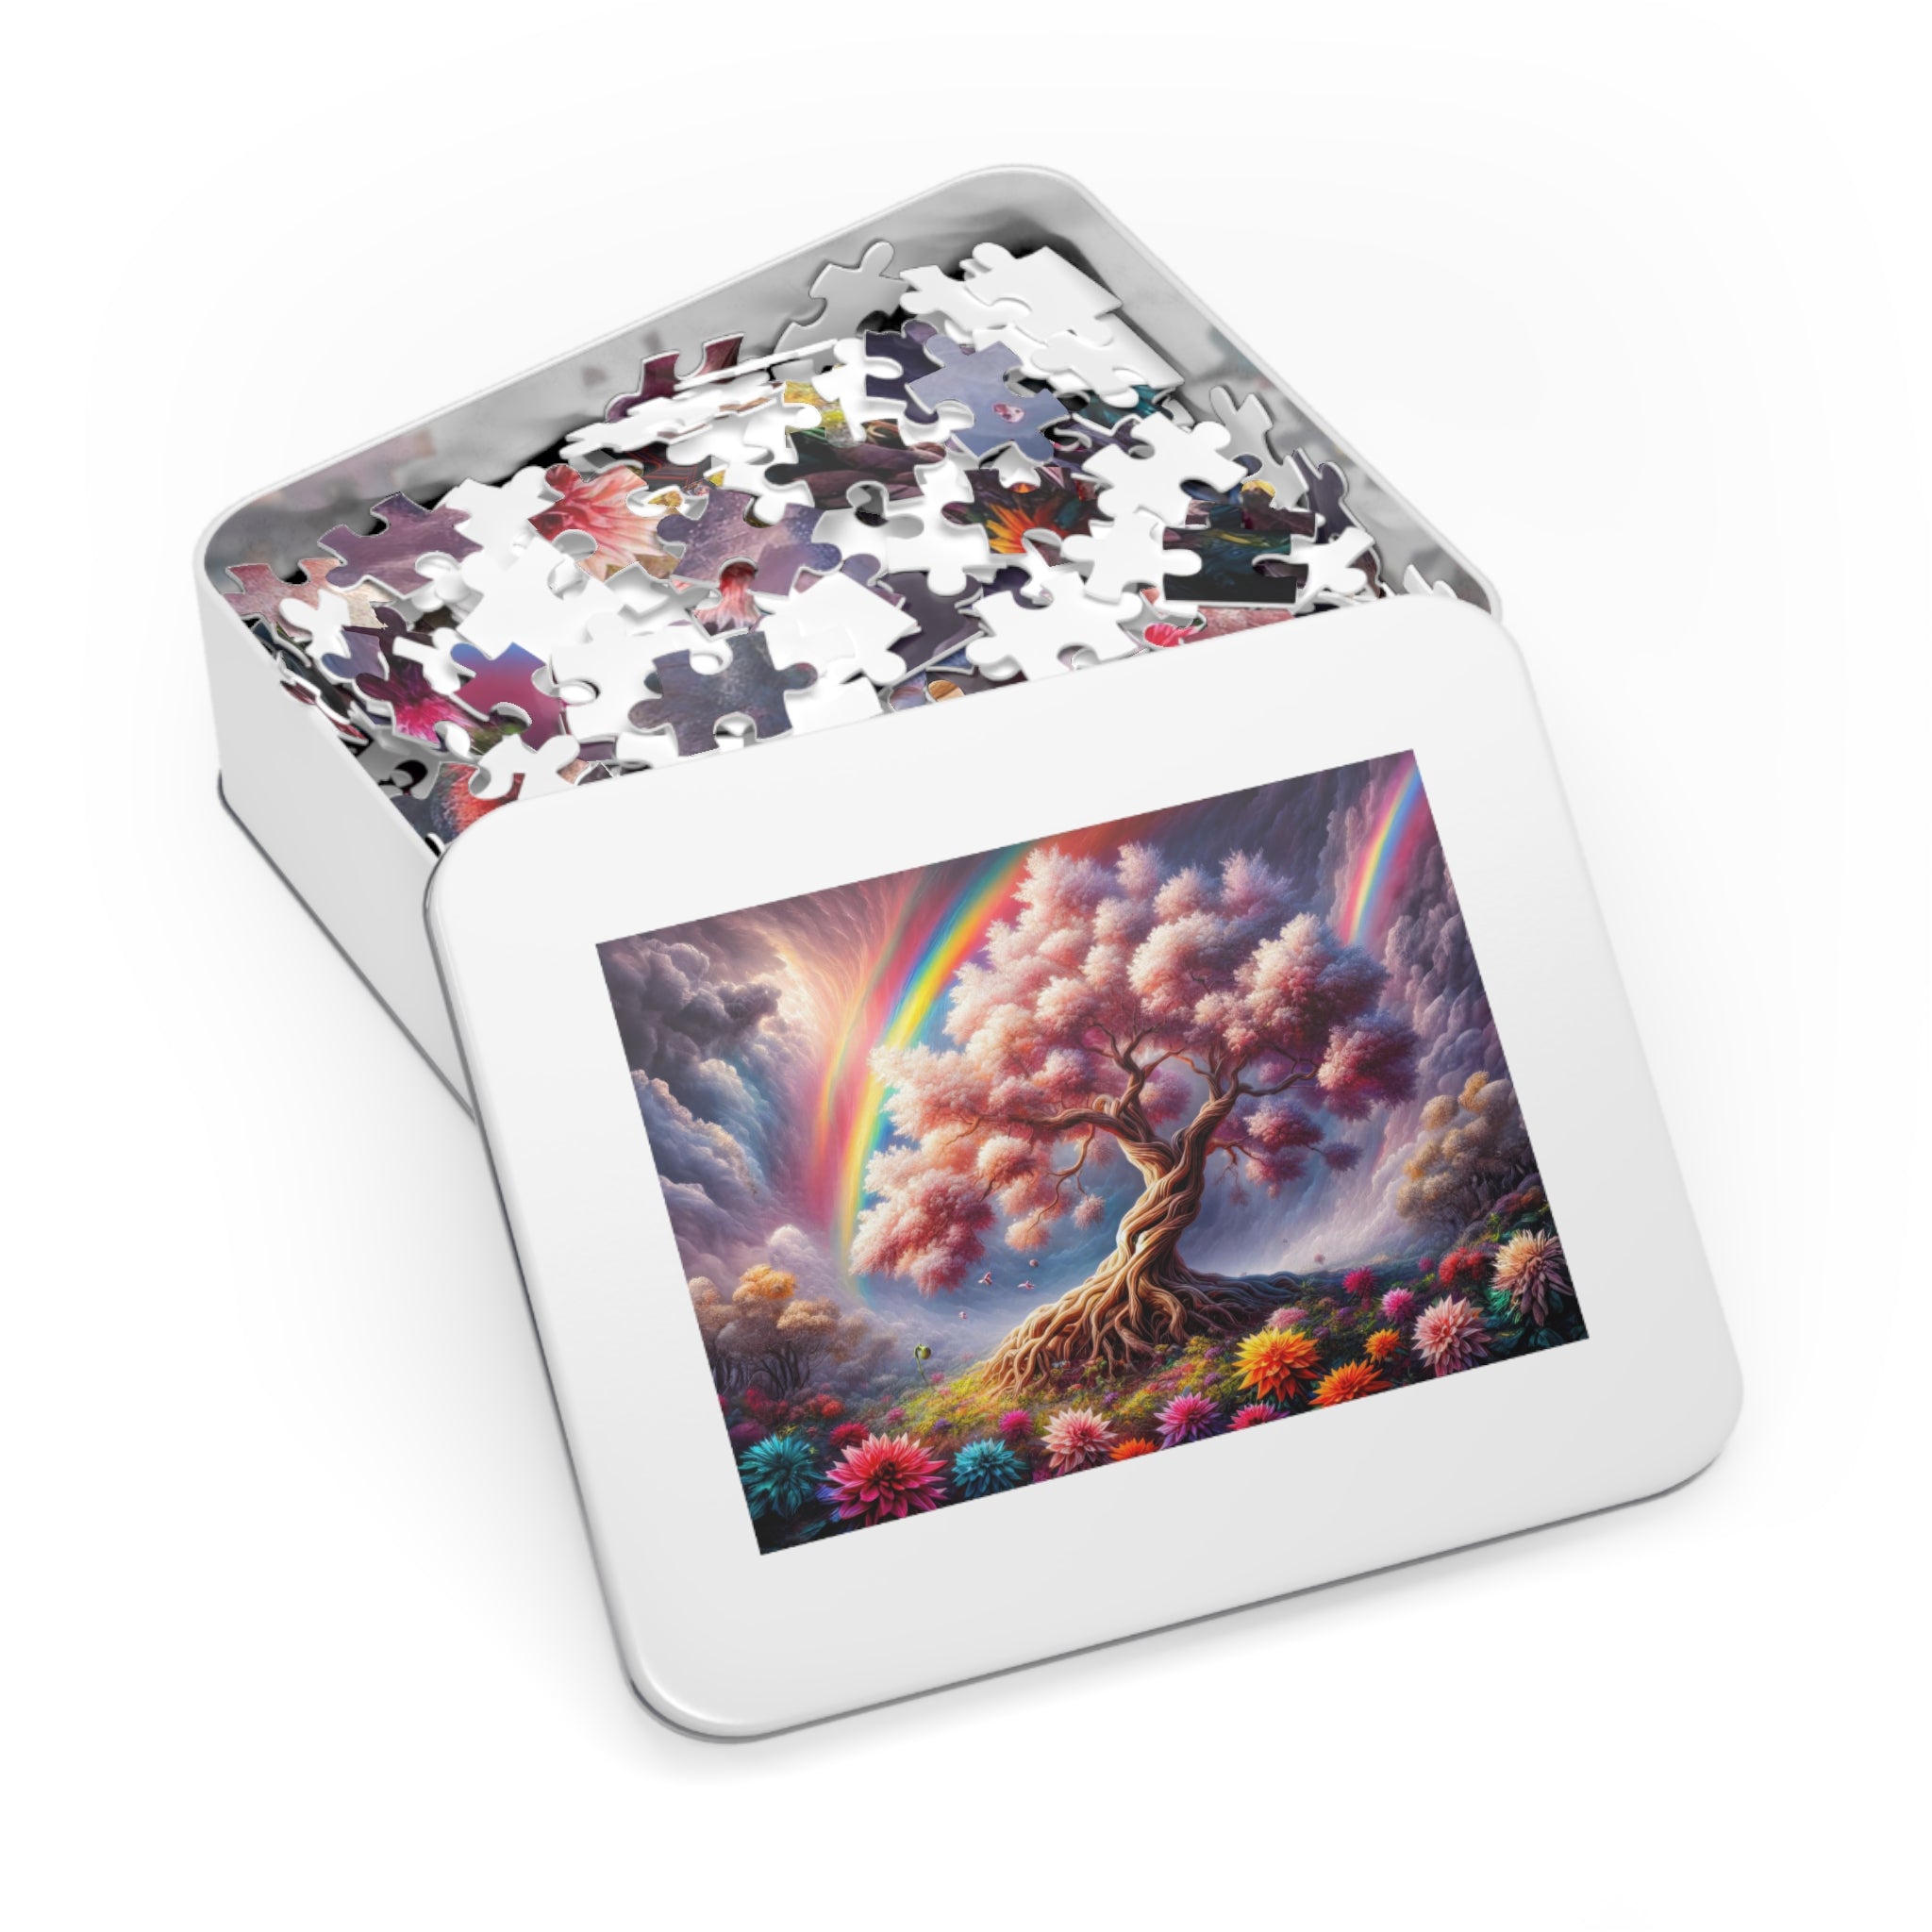 The Tree of Hues Jigsaw Puzzle